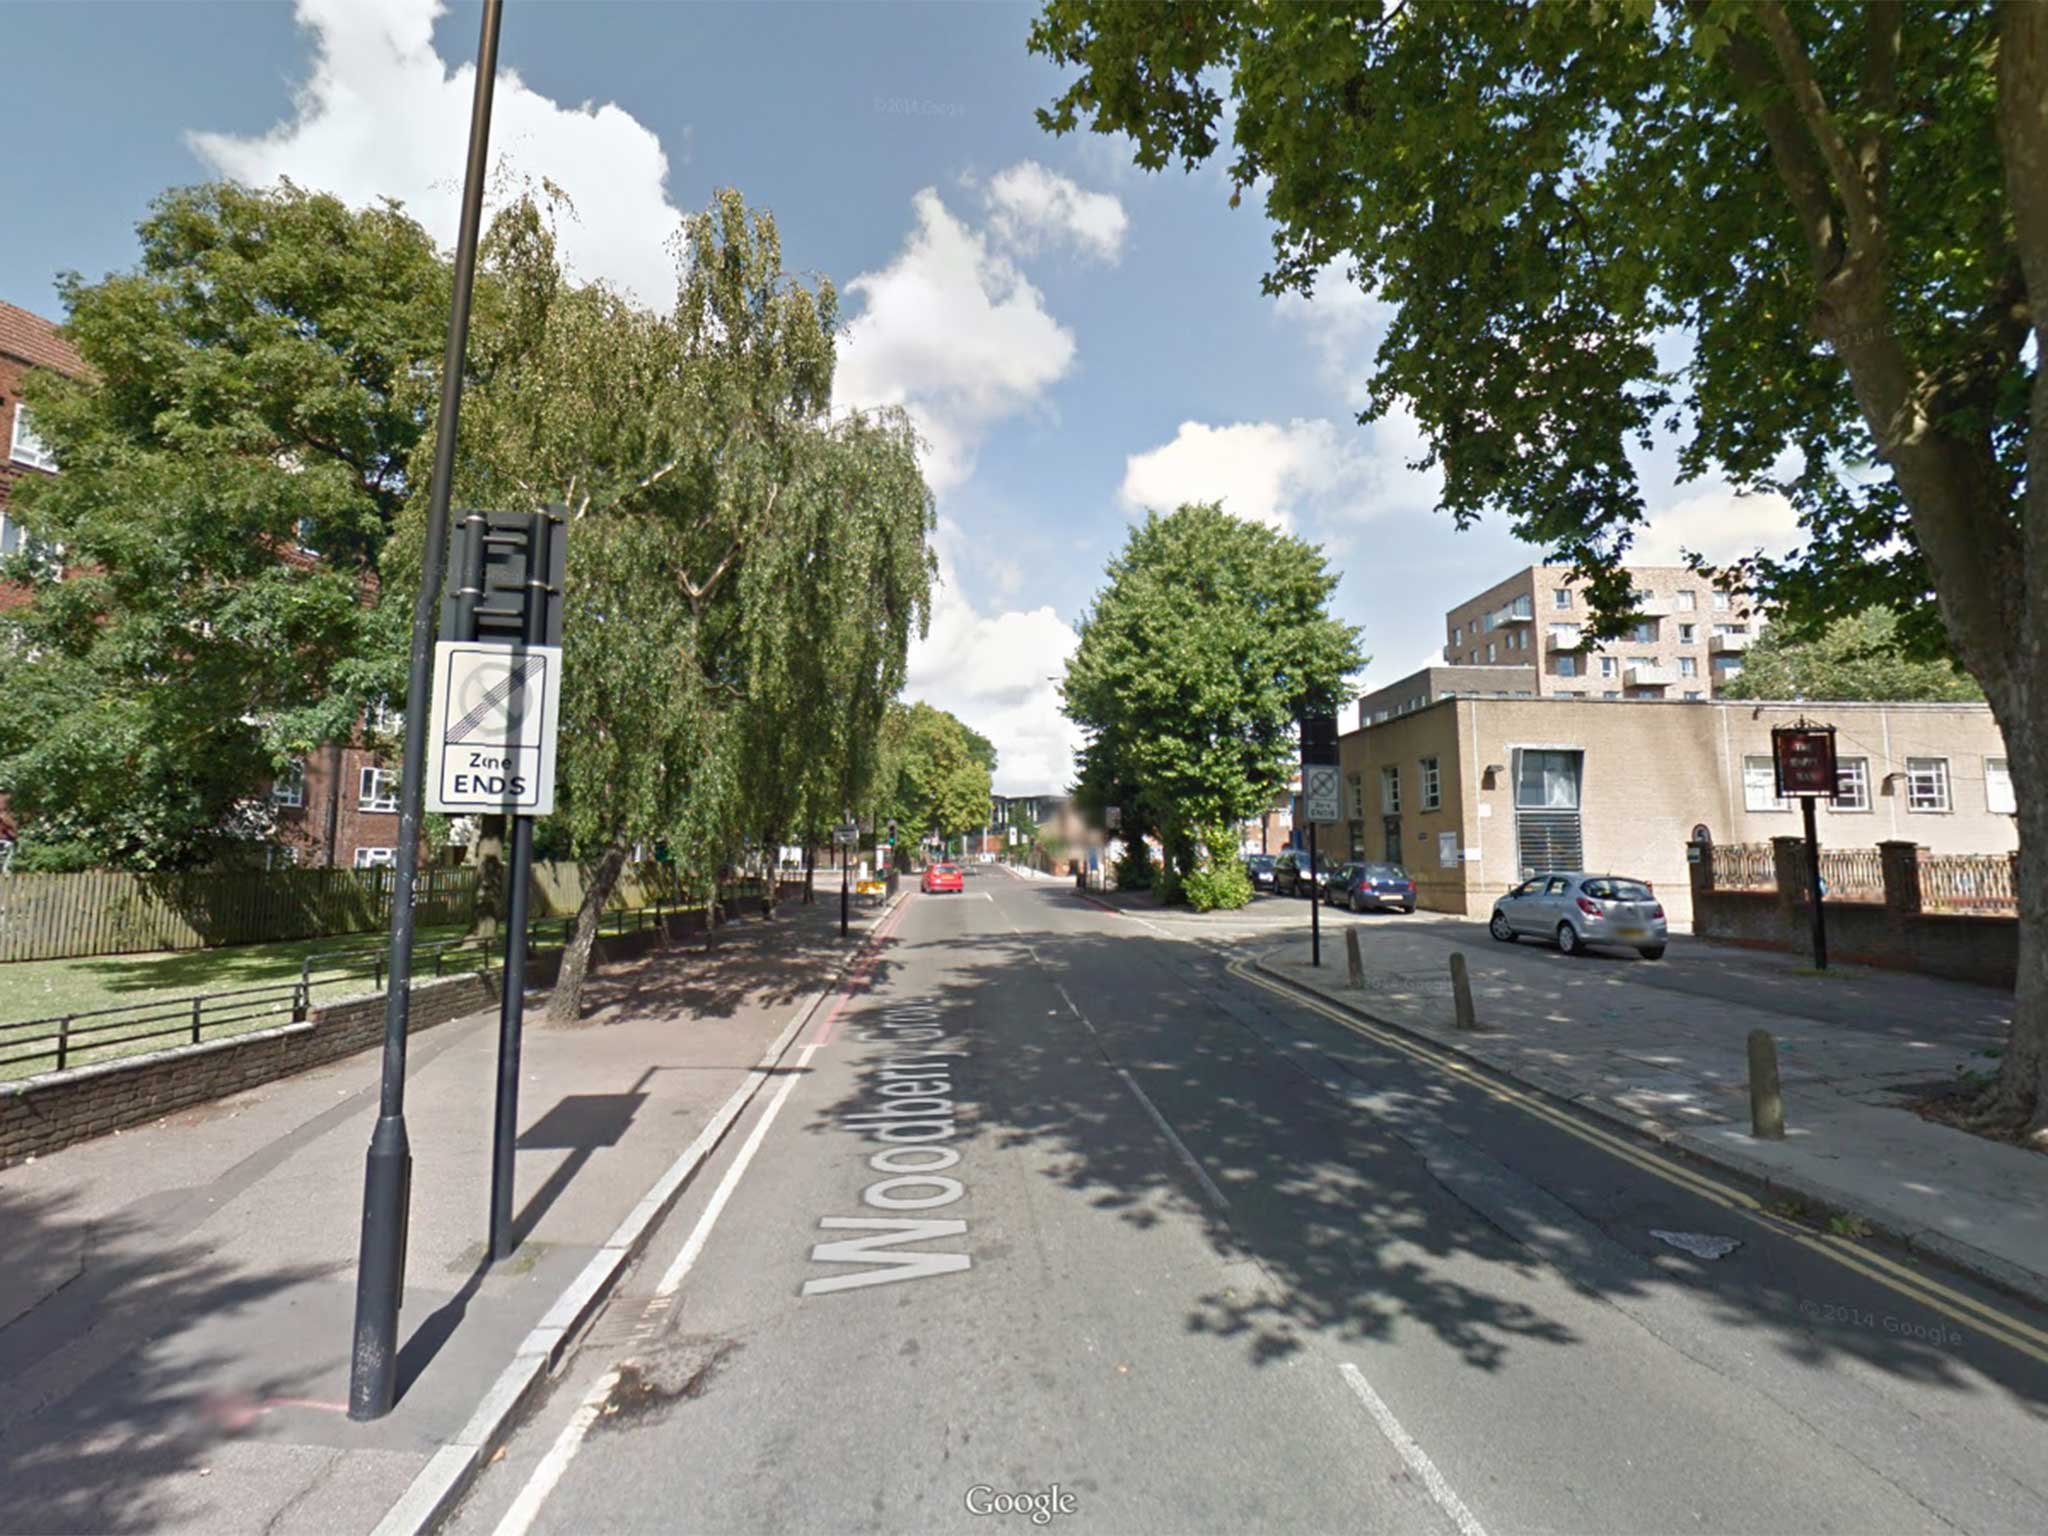 A Google Maps image of the street where the unidentified man was found by Met Police